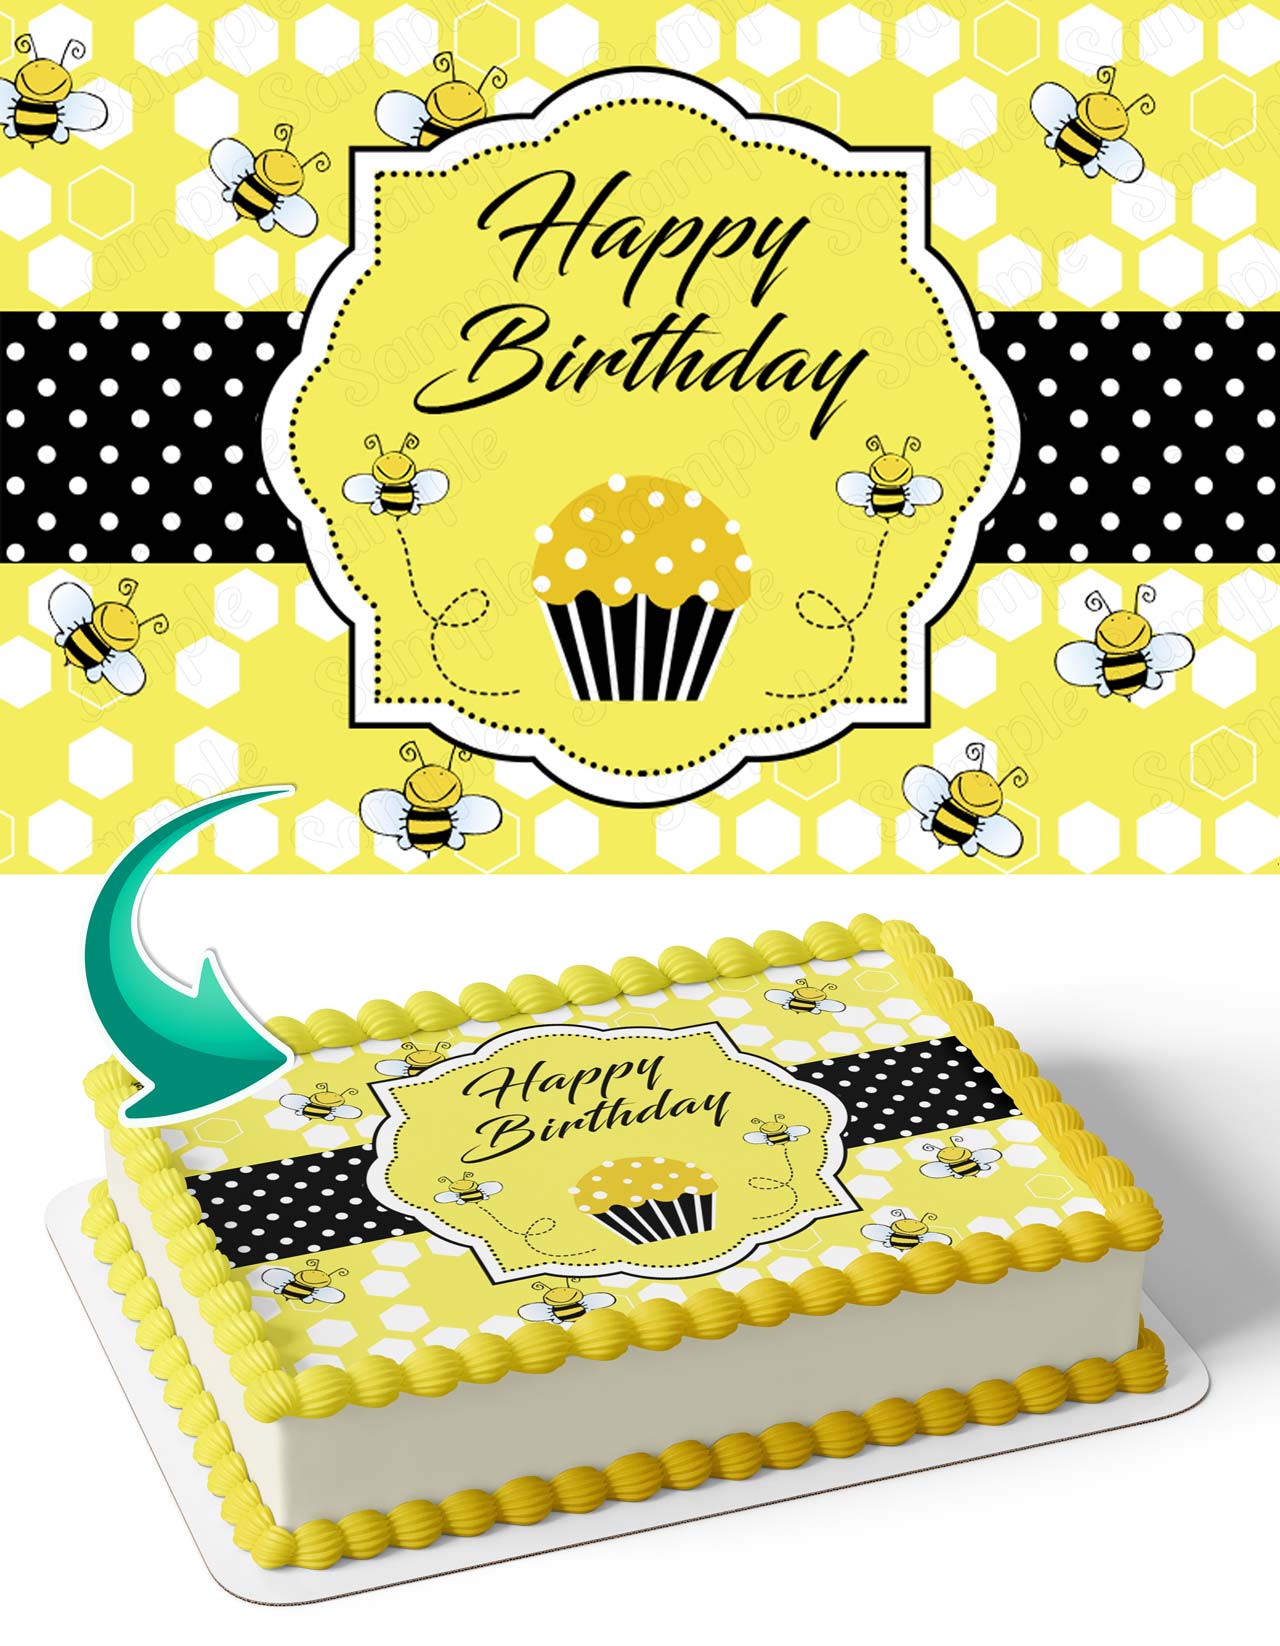 Honey Bee with a Bucket of Honey Edible Cake Topper Image ABPID53697 – A  Birthday Place